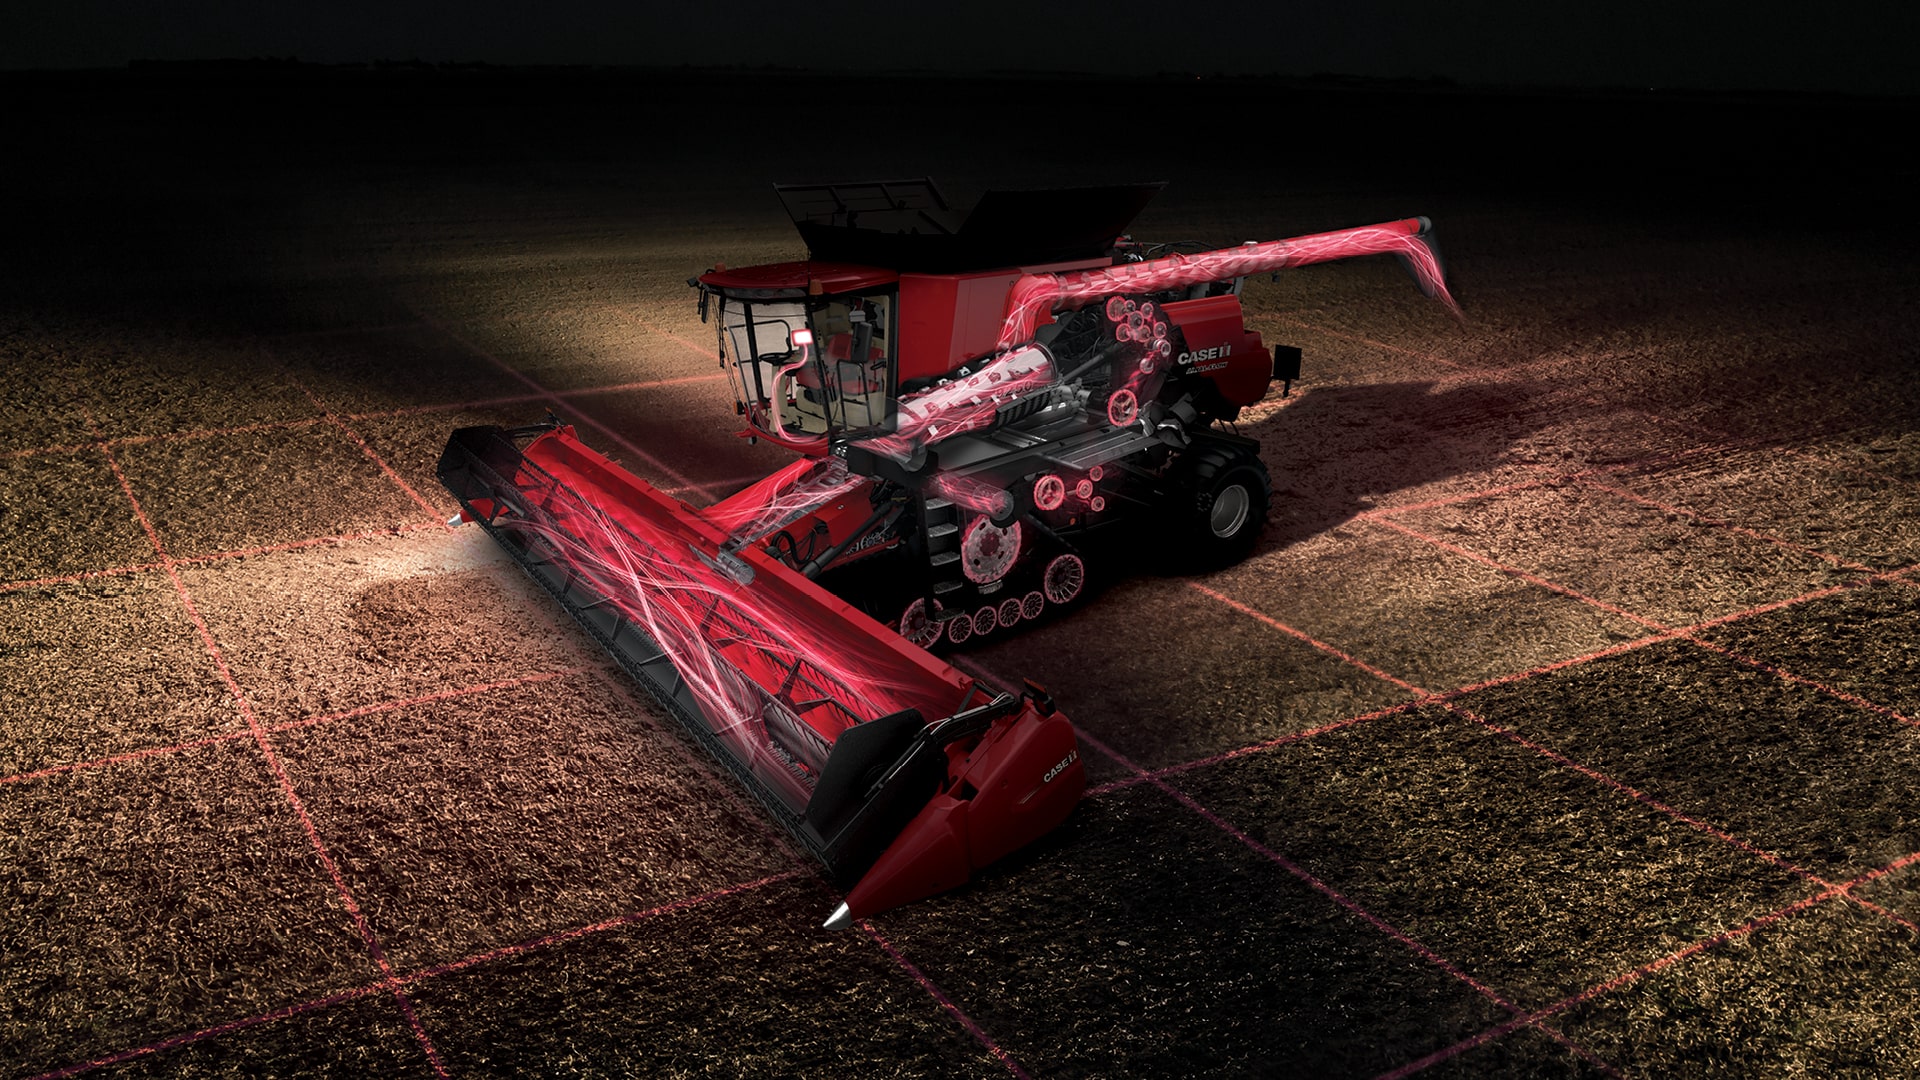 Decorative glowing CASE IH tractor operating at night